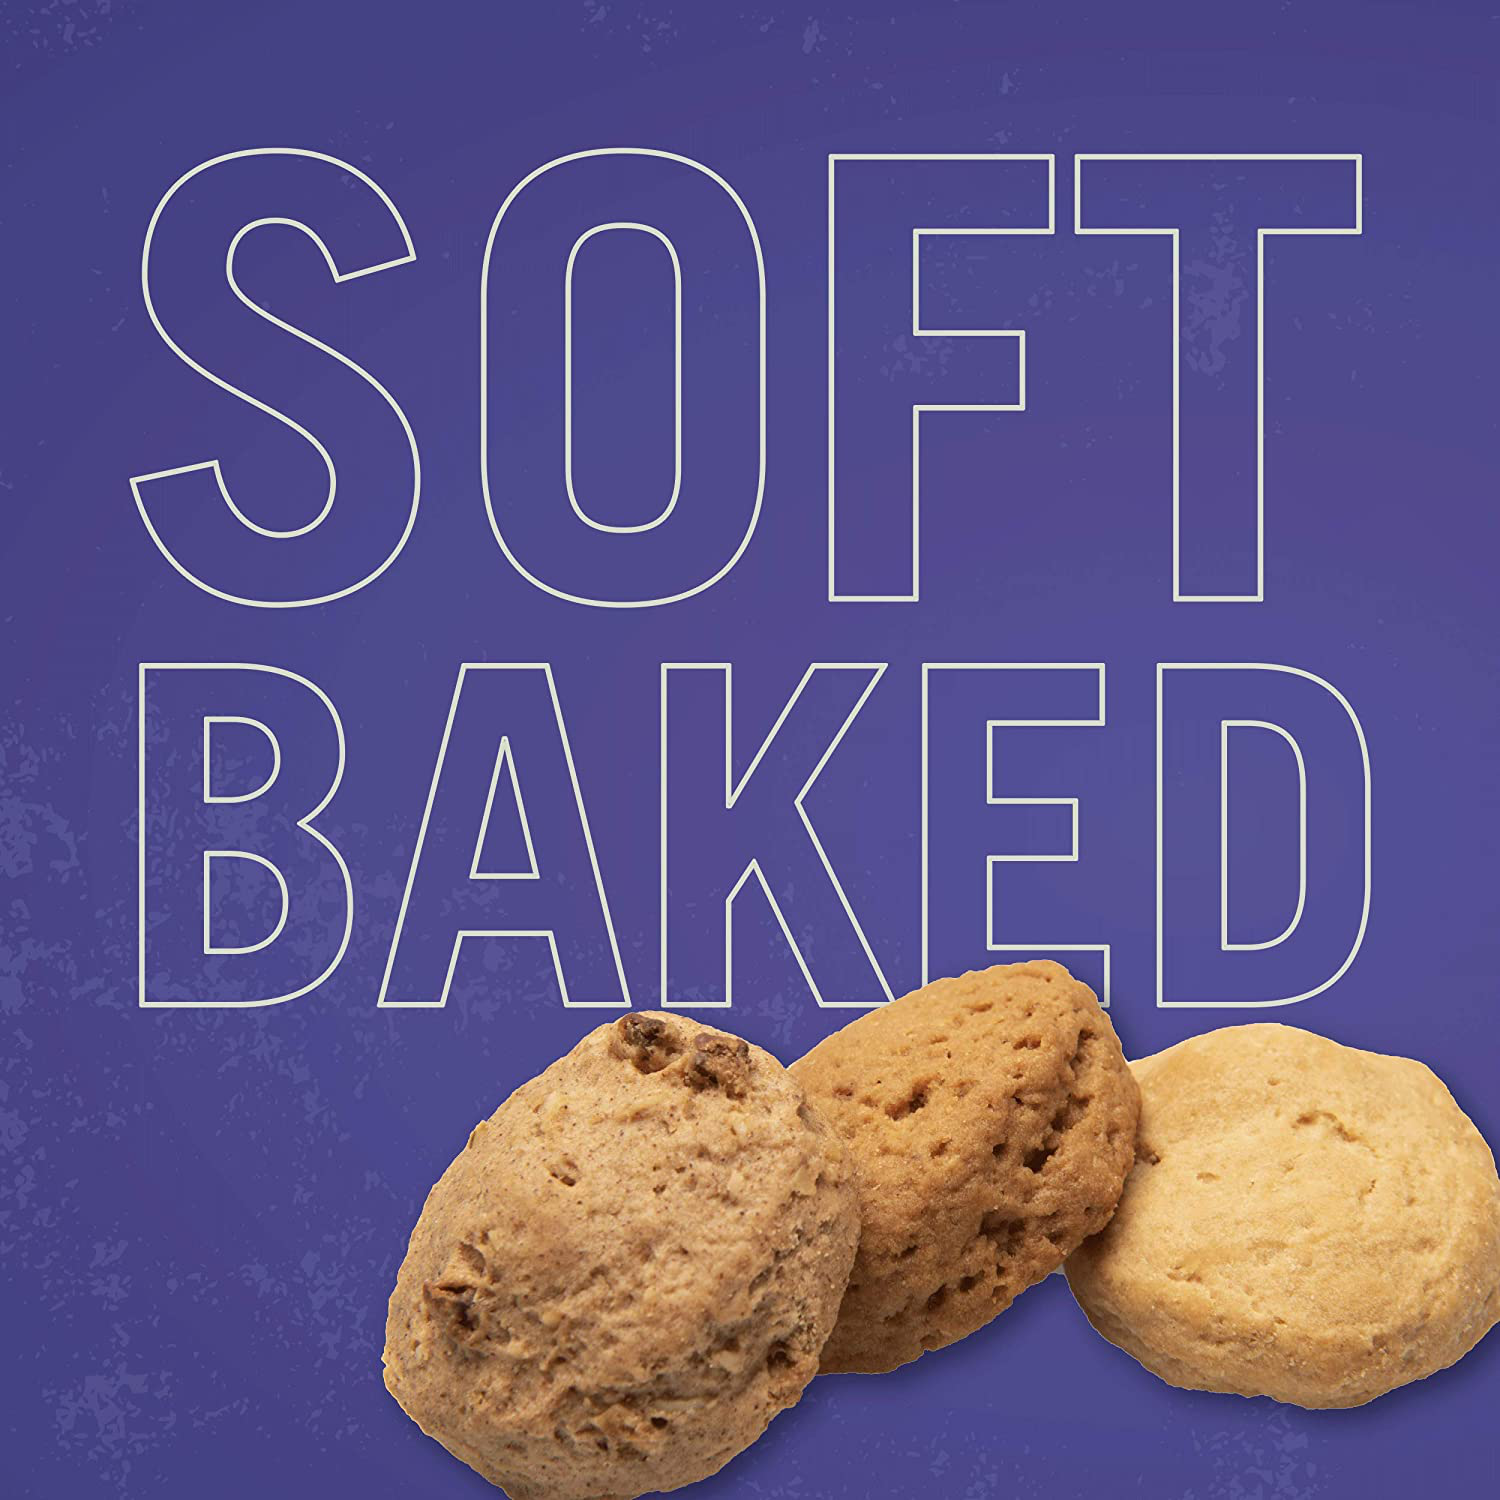 Three Dog Bakery Assort Mutt Trio, Soft Baked Cookies for Dogs